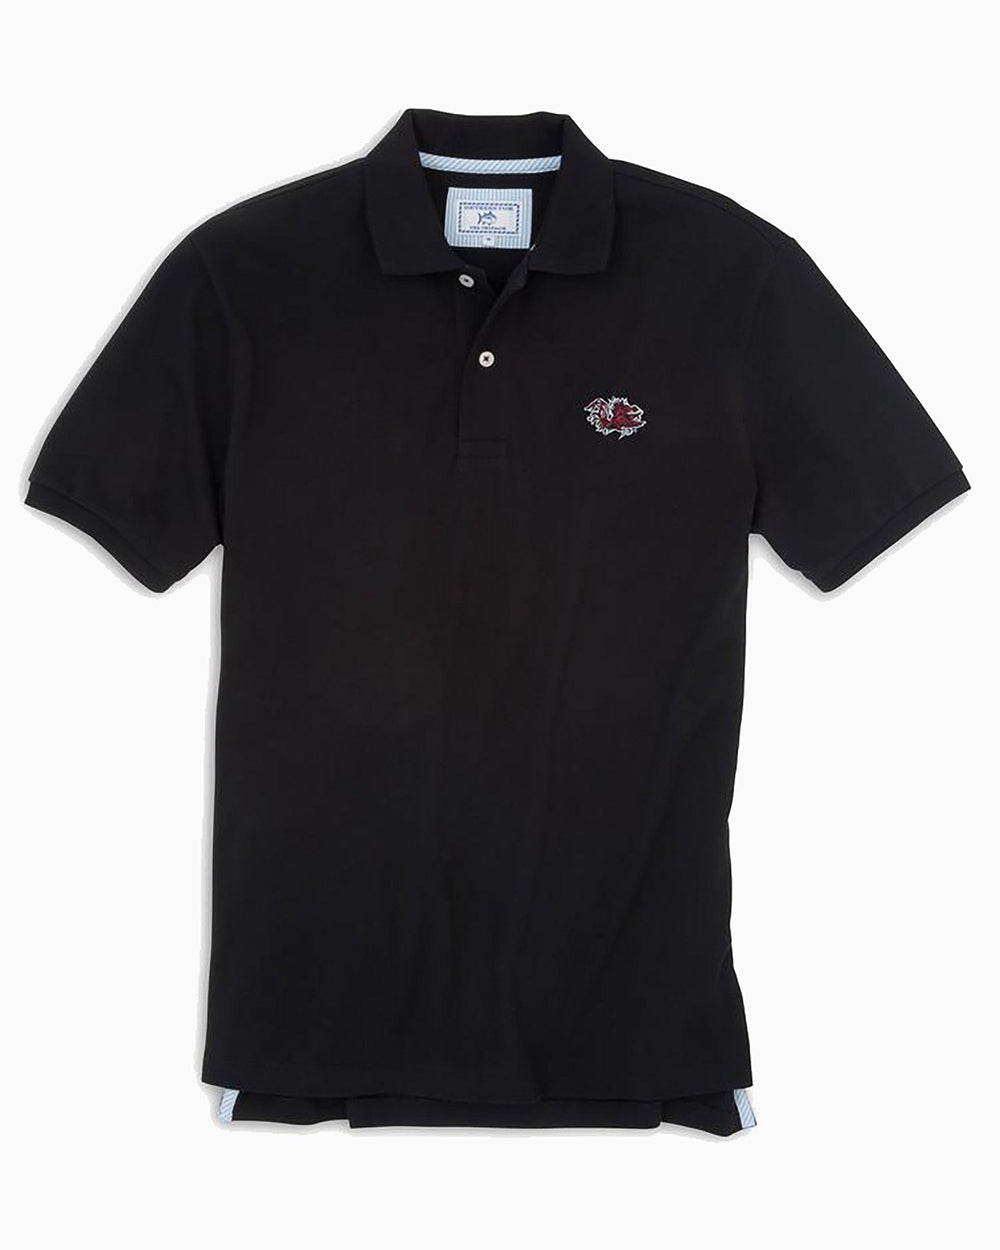 The front view of the Men's Black USC Gamecocks Pique Polo Shirt by Southern Tide - Black